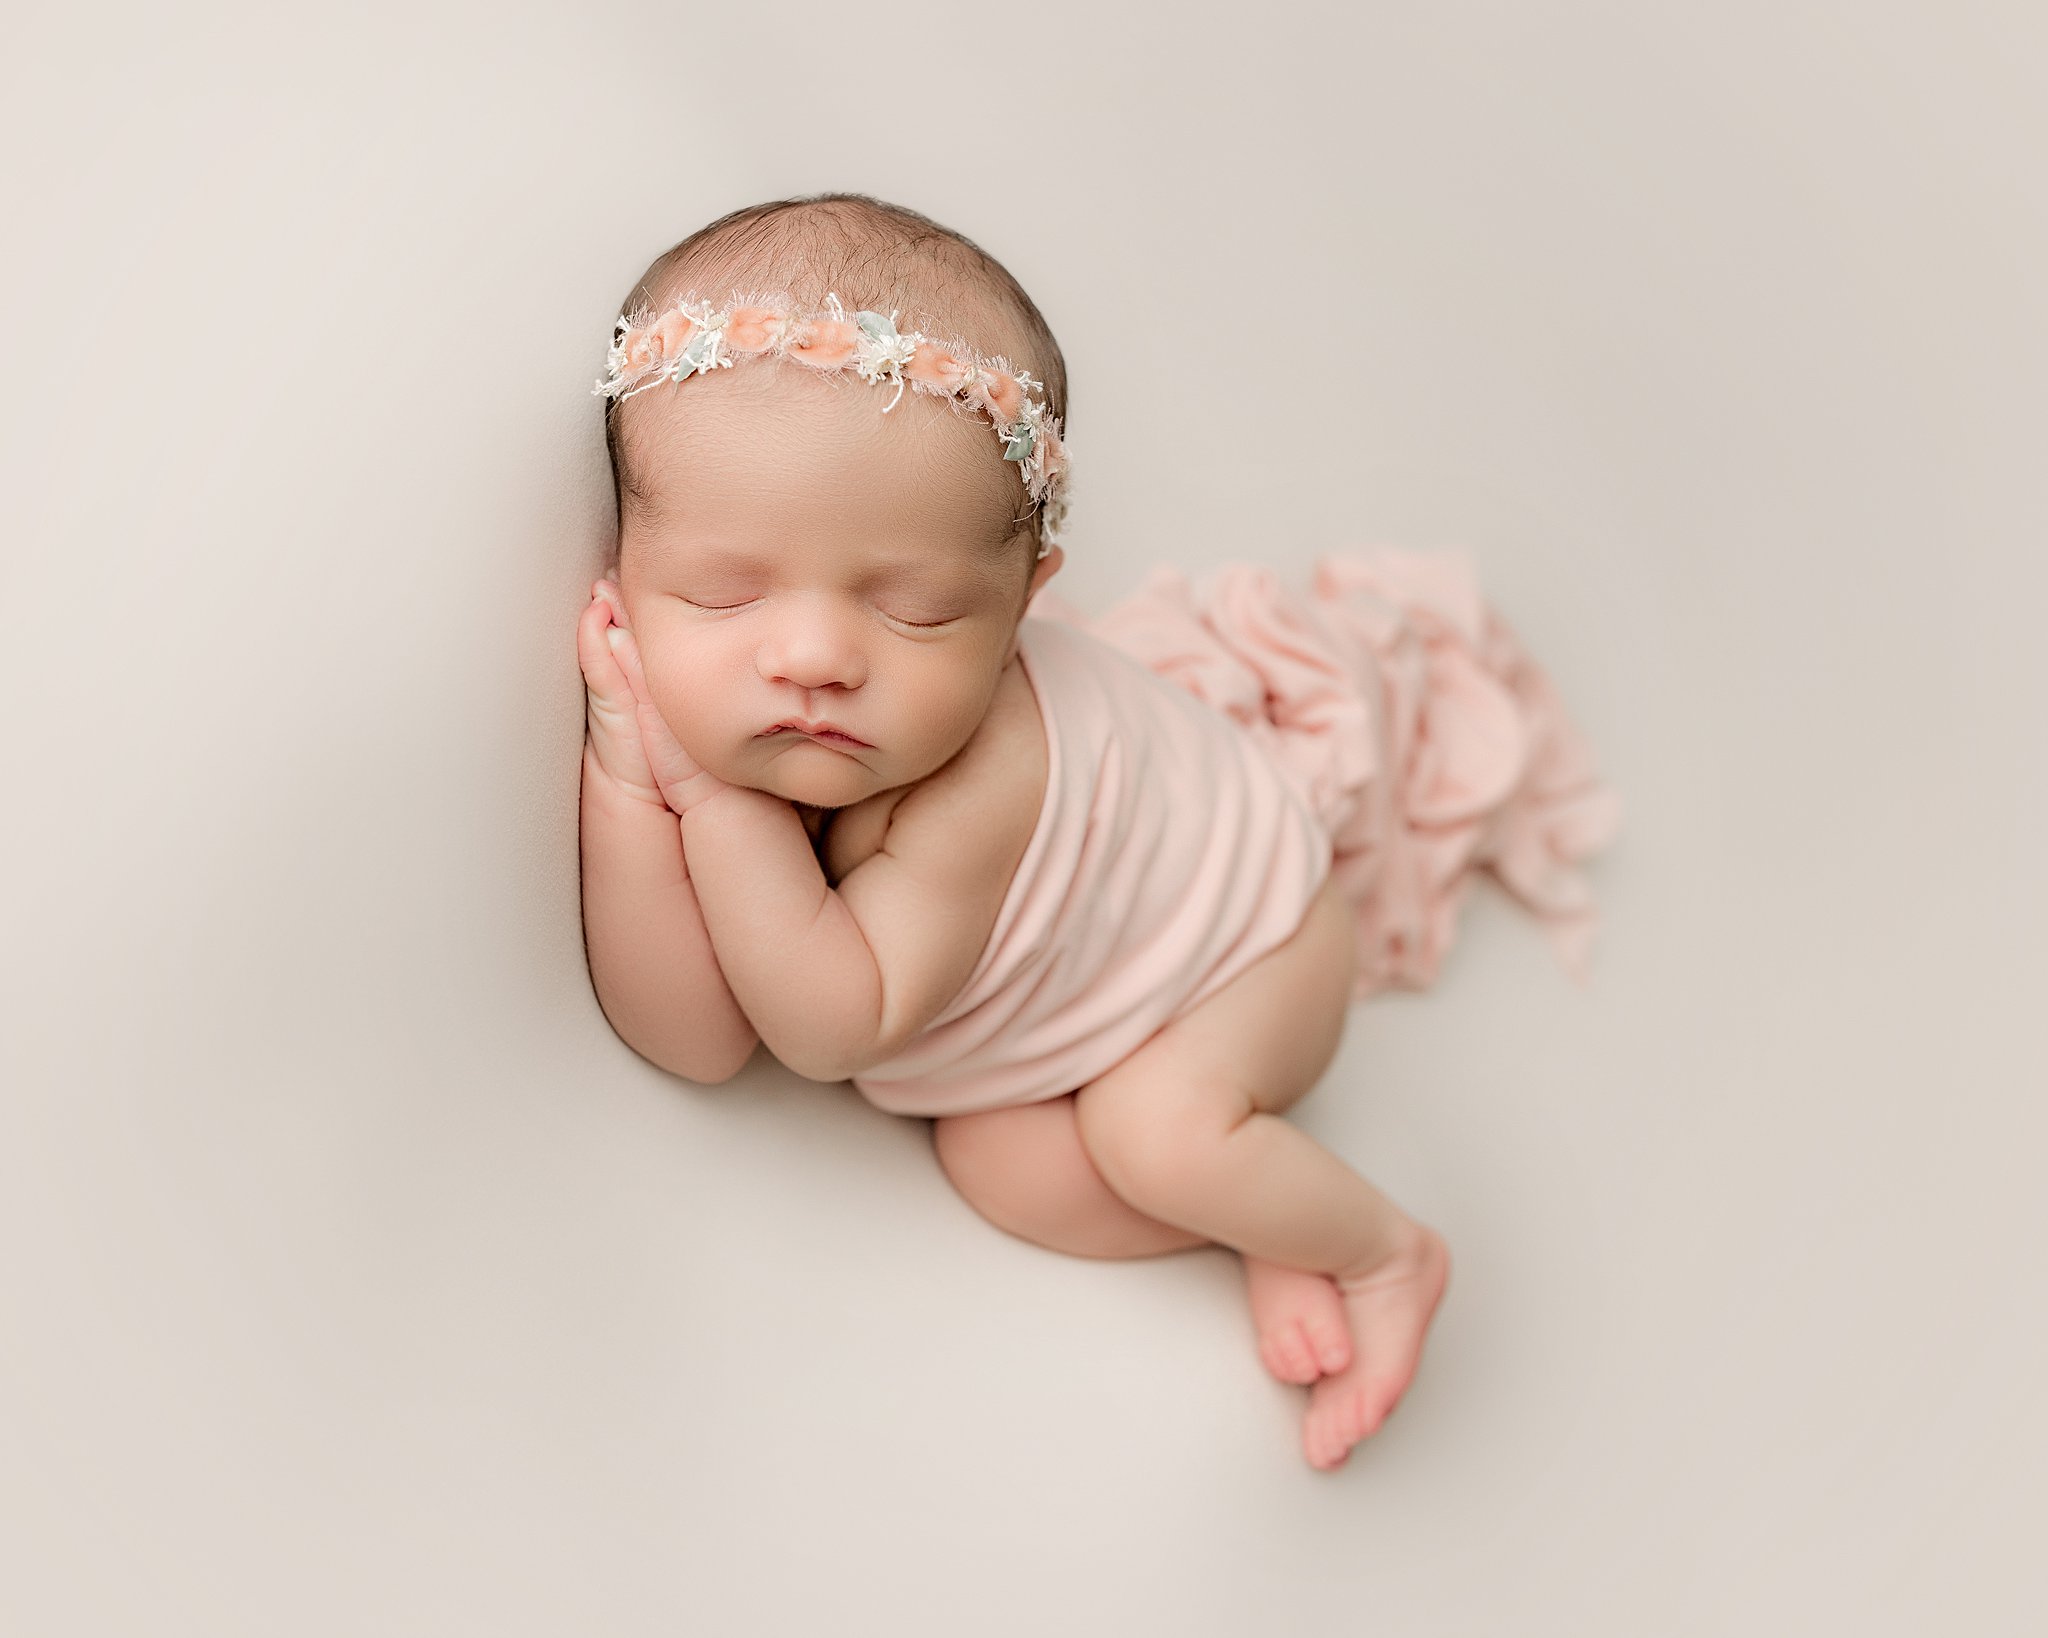 A newborn baby sleeps while resting her head on her hands while wrapped in a pink blanket and a floral headband baby bloomers charleston